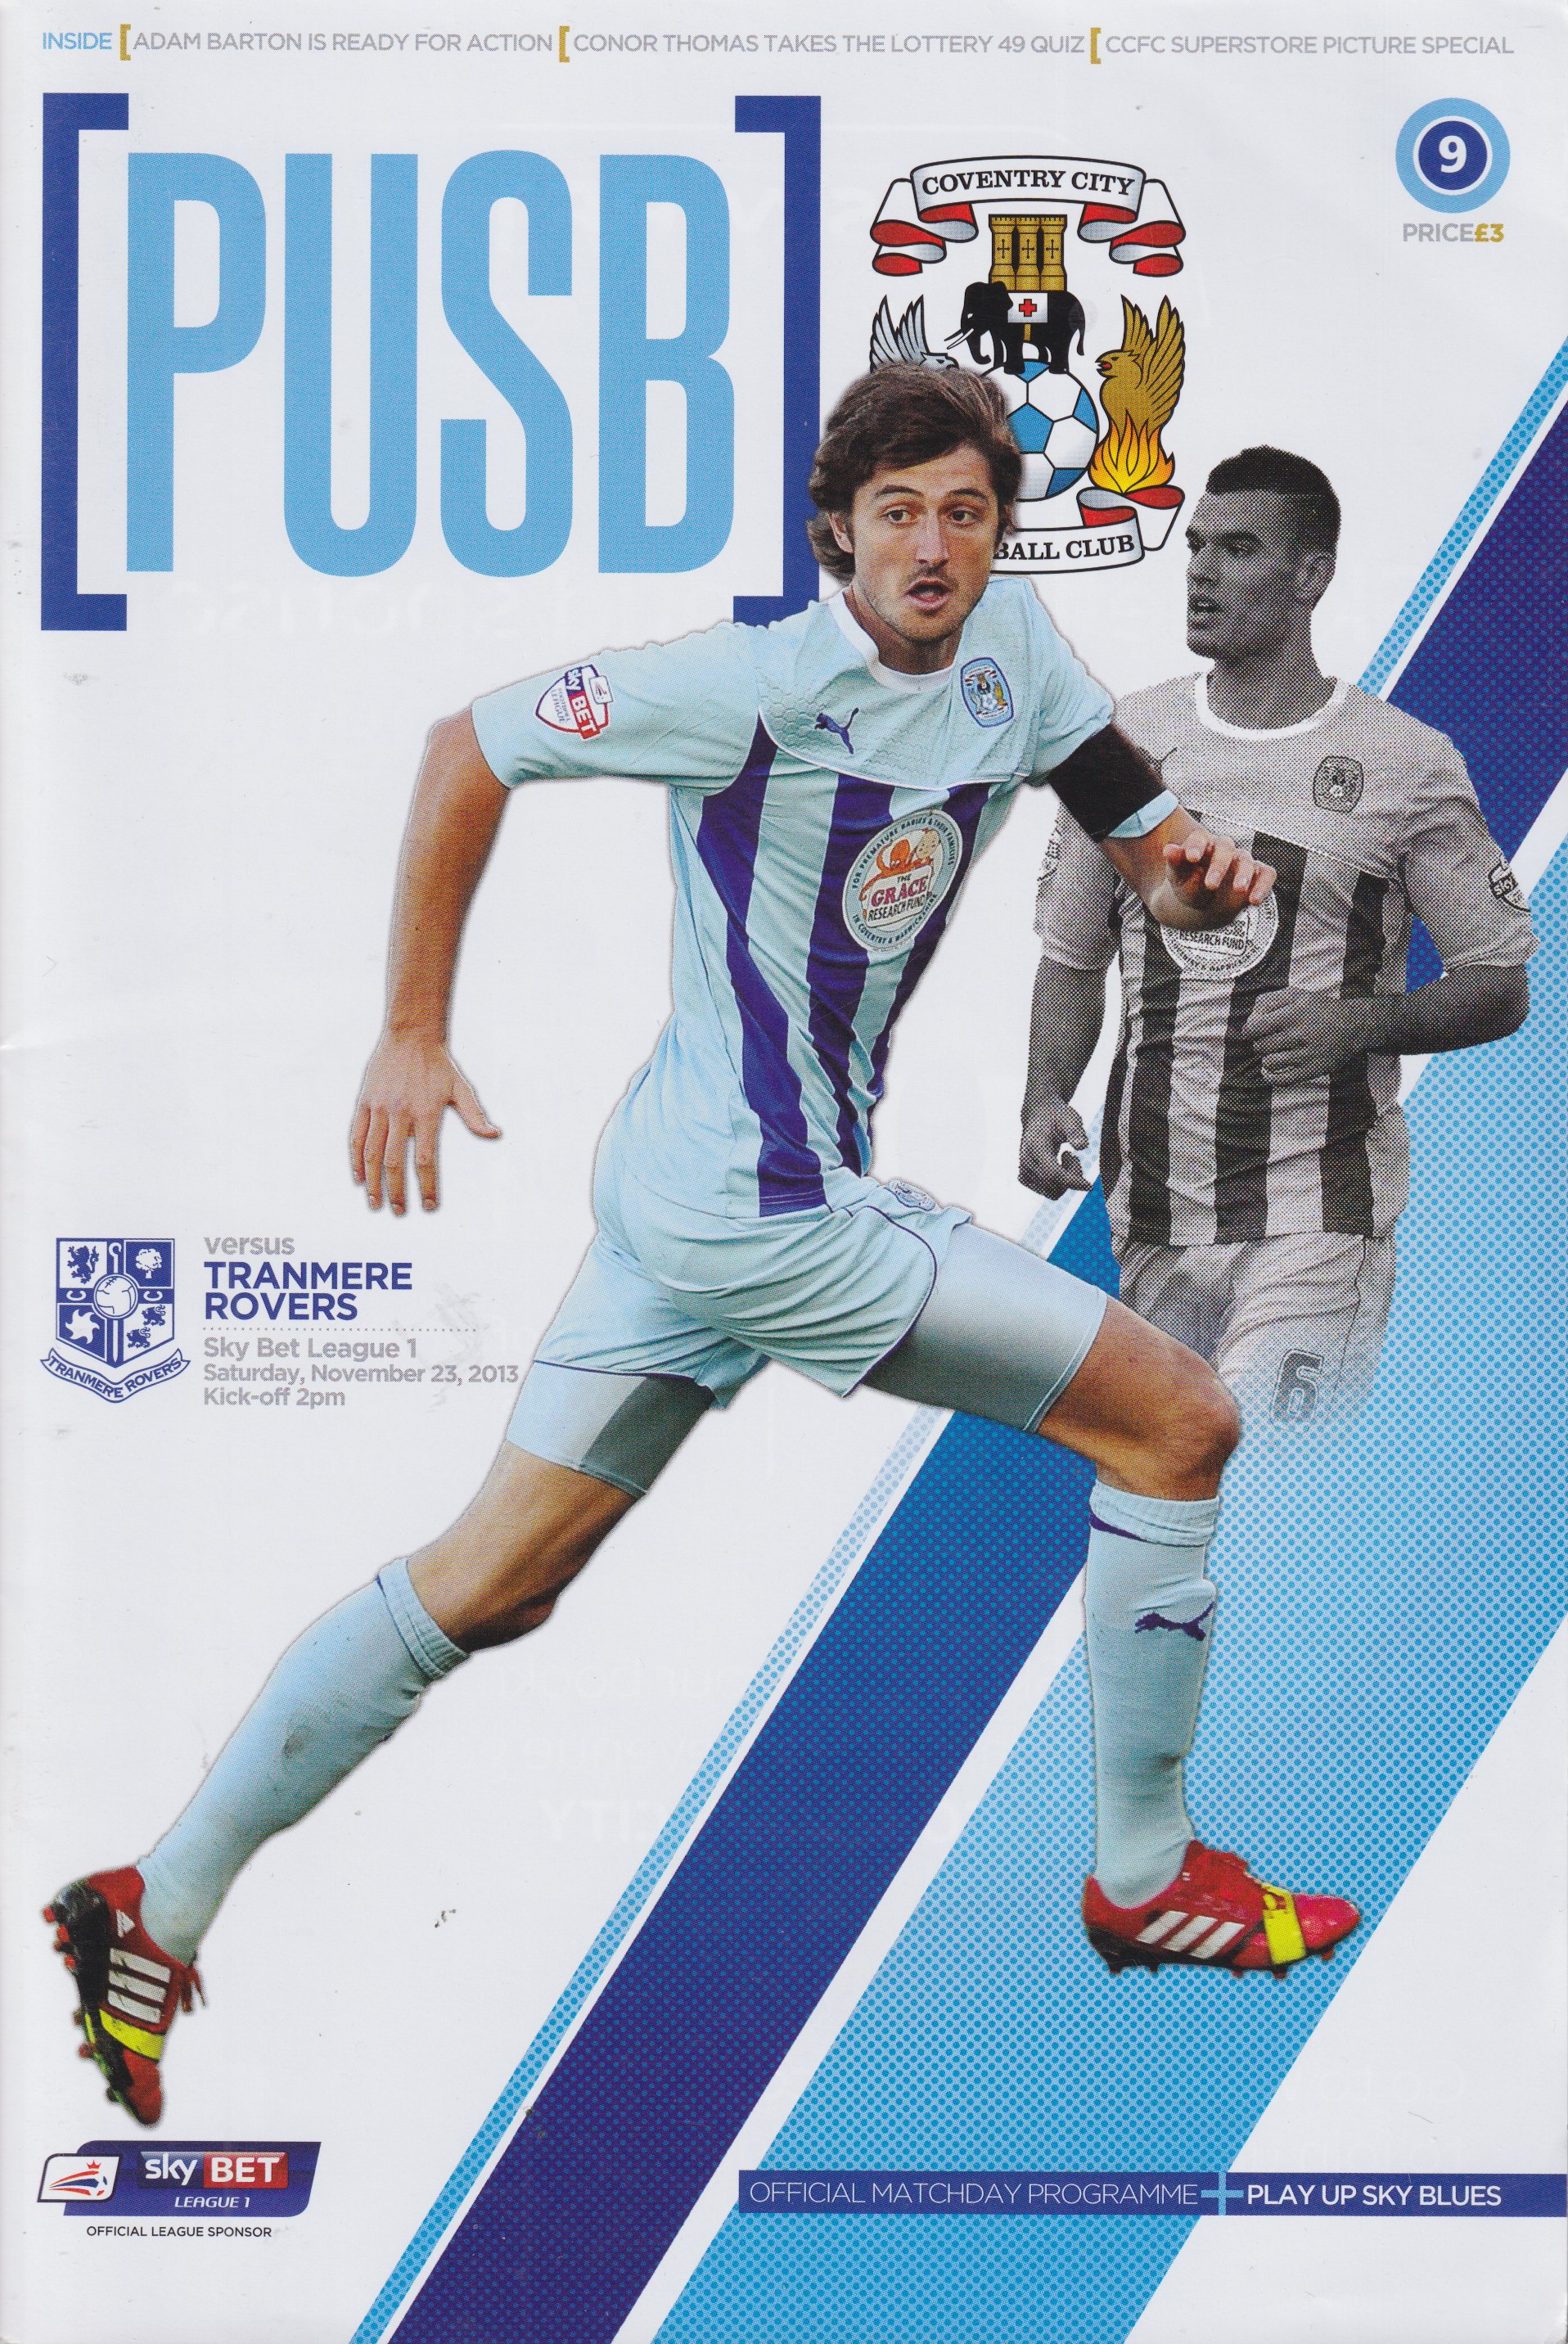 Match Programme For {home}} 1-5 Tranmere Rovers, League, 2013-11-23